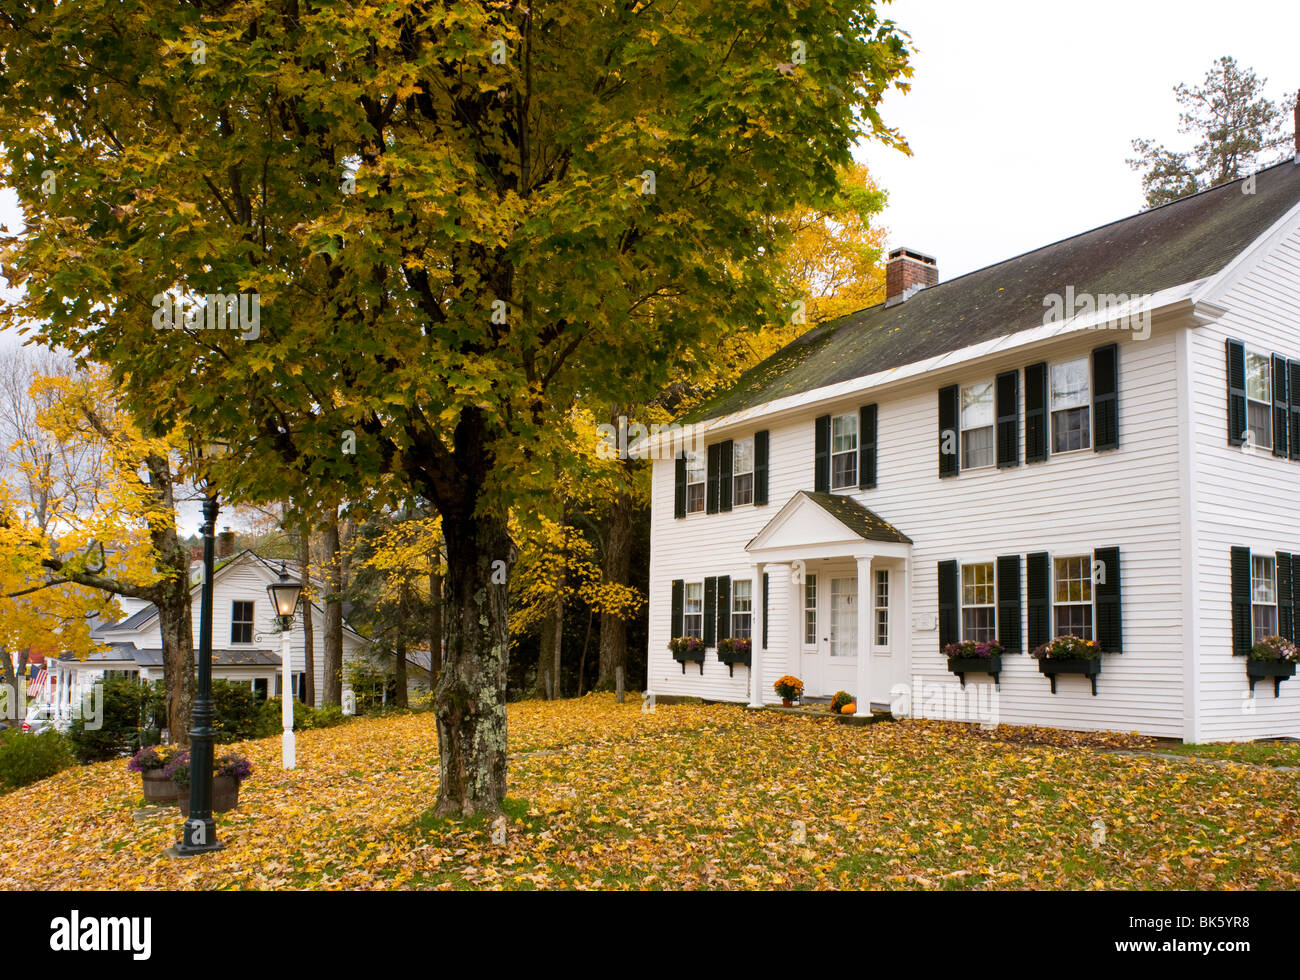 An old house surrounded by autumn leaves in Grafton, Vermont, New England, United States of America, North America Stock Photo